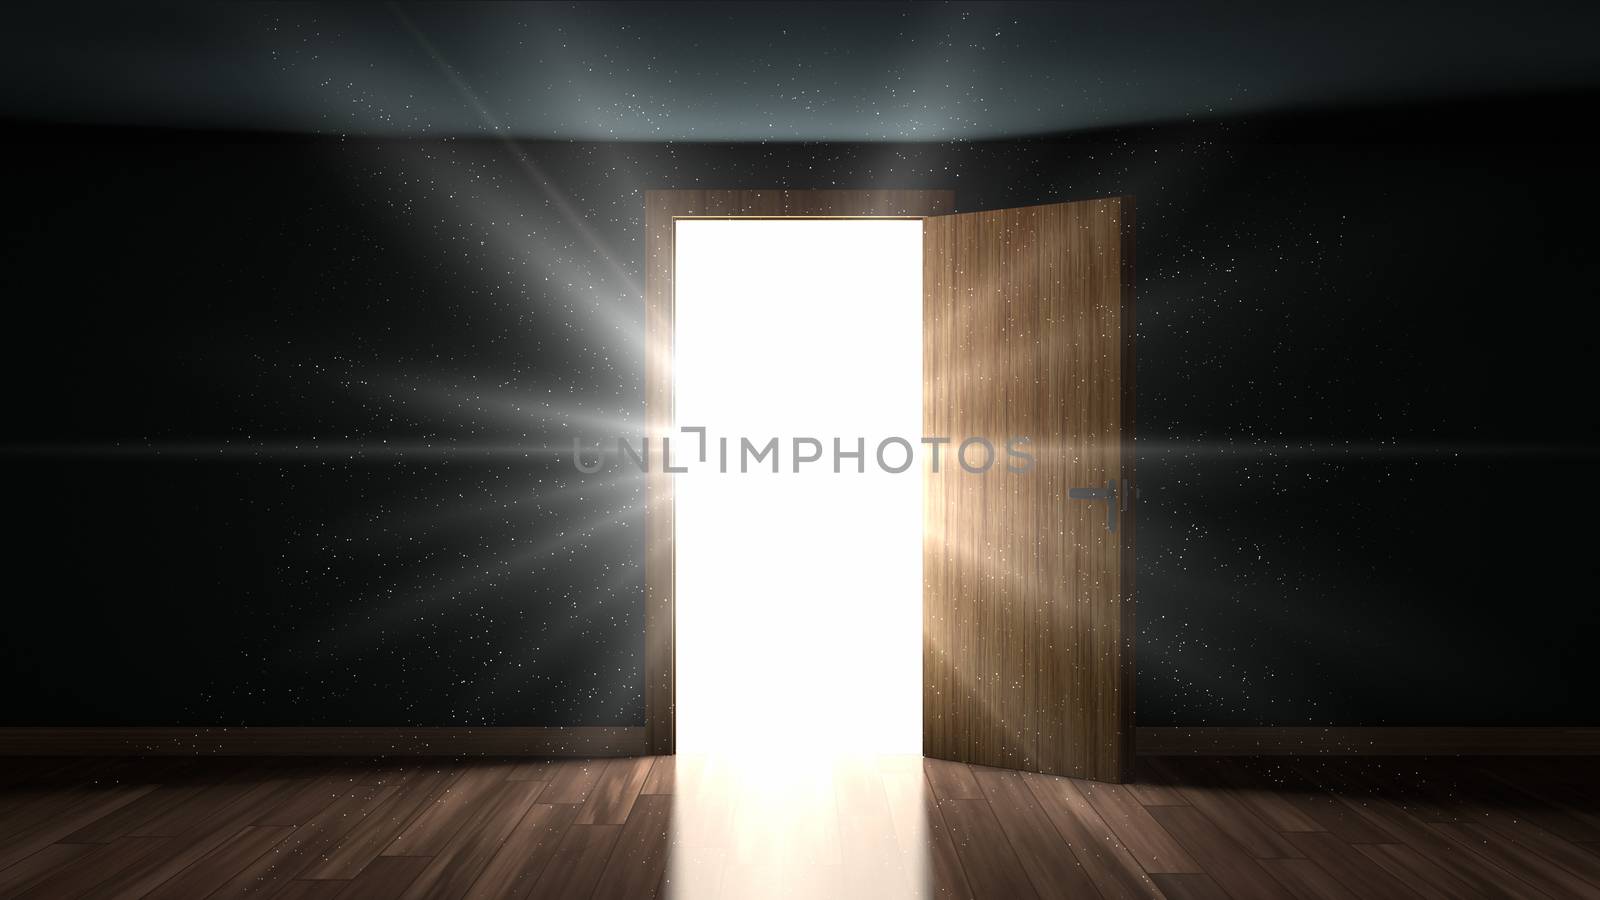 Light and particles in a room through the opening door by manaemedia